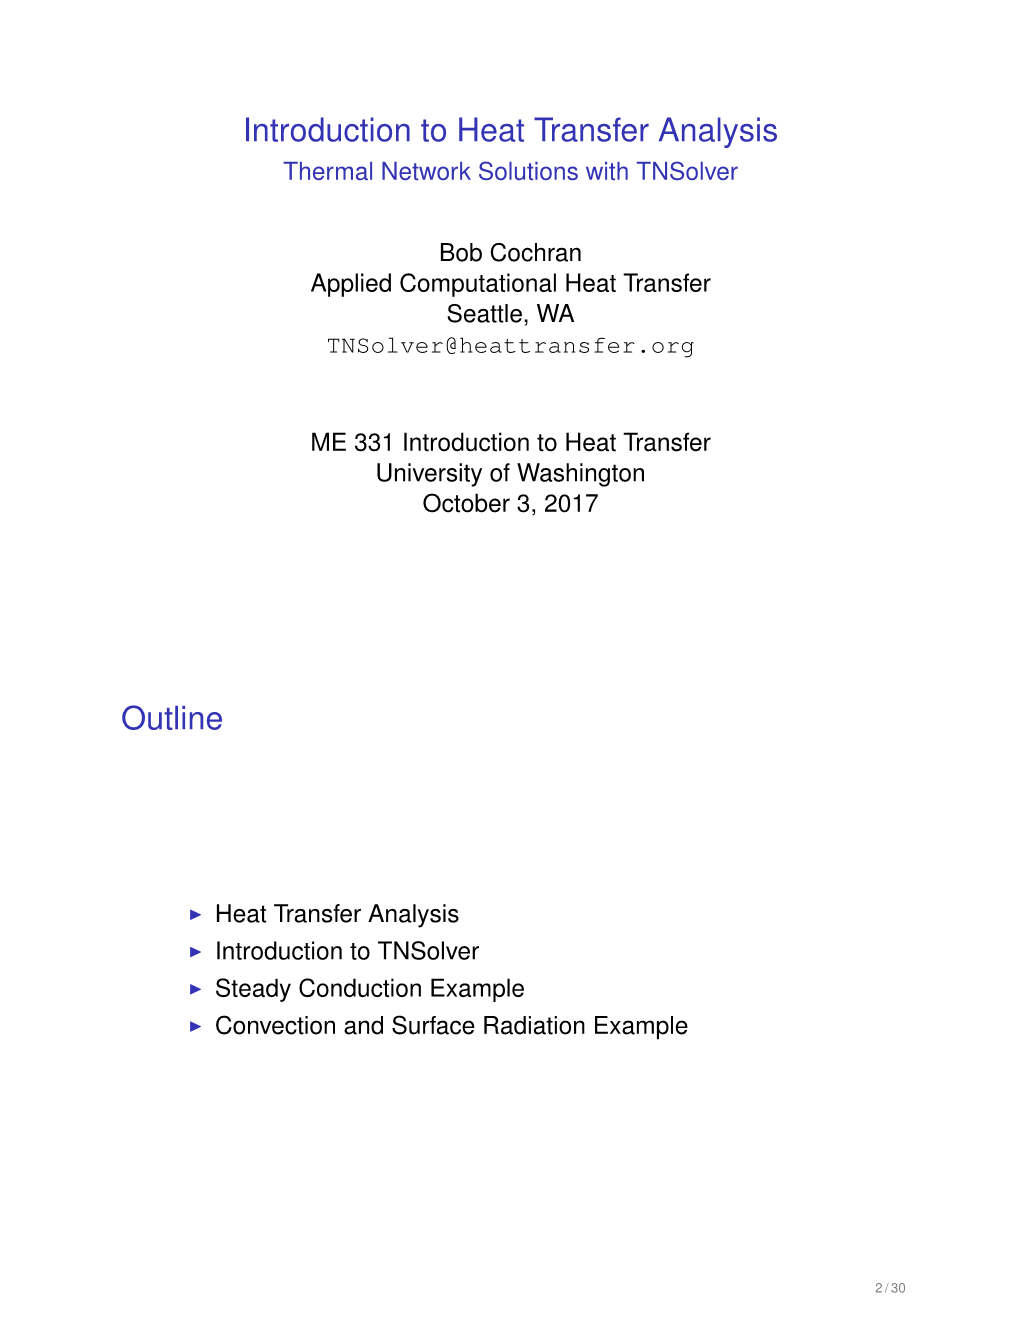 Introduction to Heat Transfer Analysis Thermal Network Solutions with Tnsolver